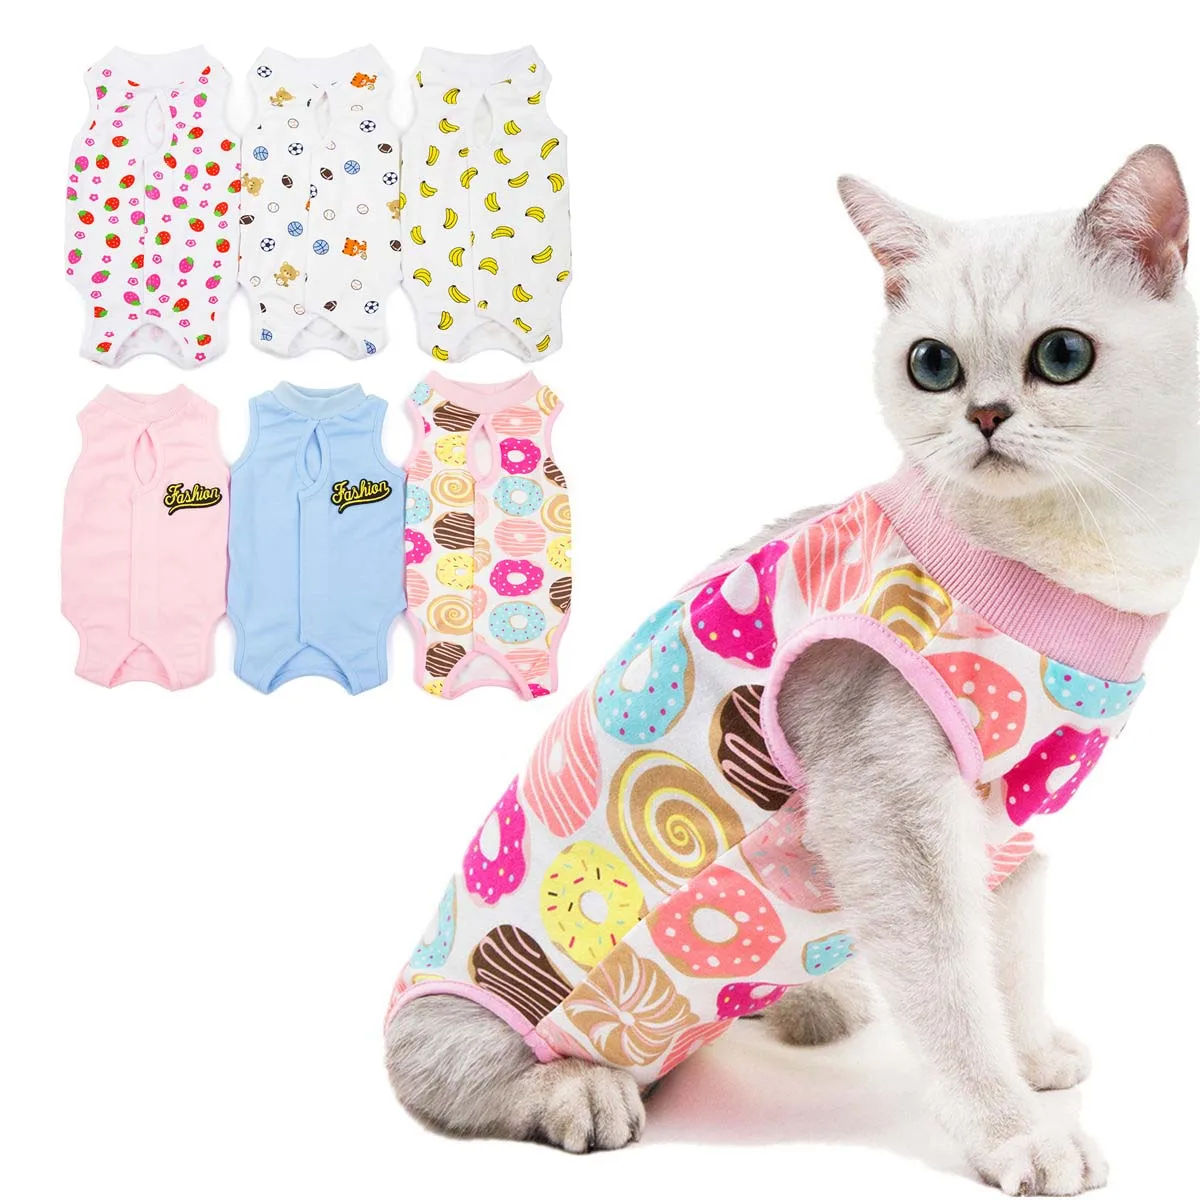 Cotton Cat Clothes Recovery Suit Cotton Cat Weaning Bodysuit After Surgery Wear Anti Licking Wounds for Small Dogs Female Cat cat puppy sterilization suit pet surgery suit for small dog cats weaning vest breathable kitten weaning clothes pet jumpsuit